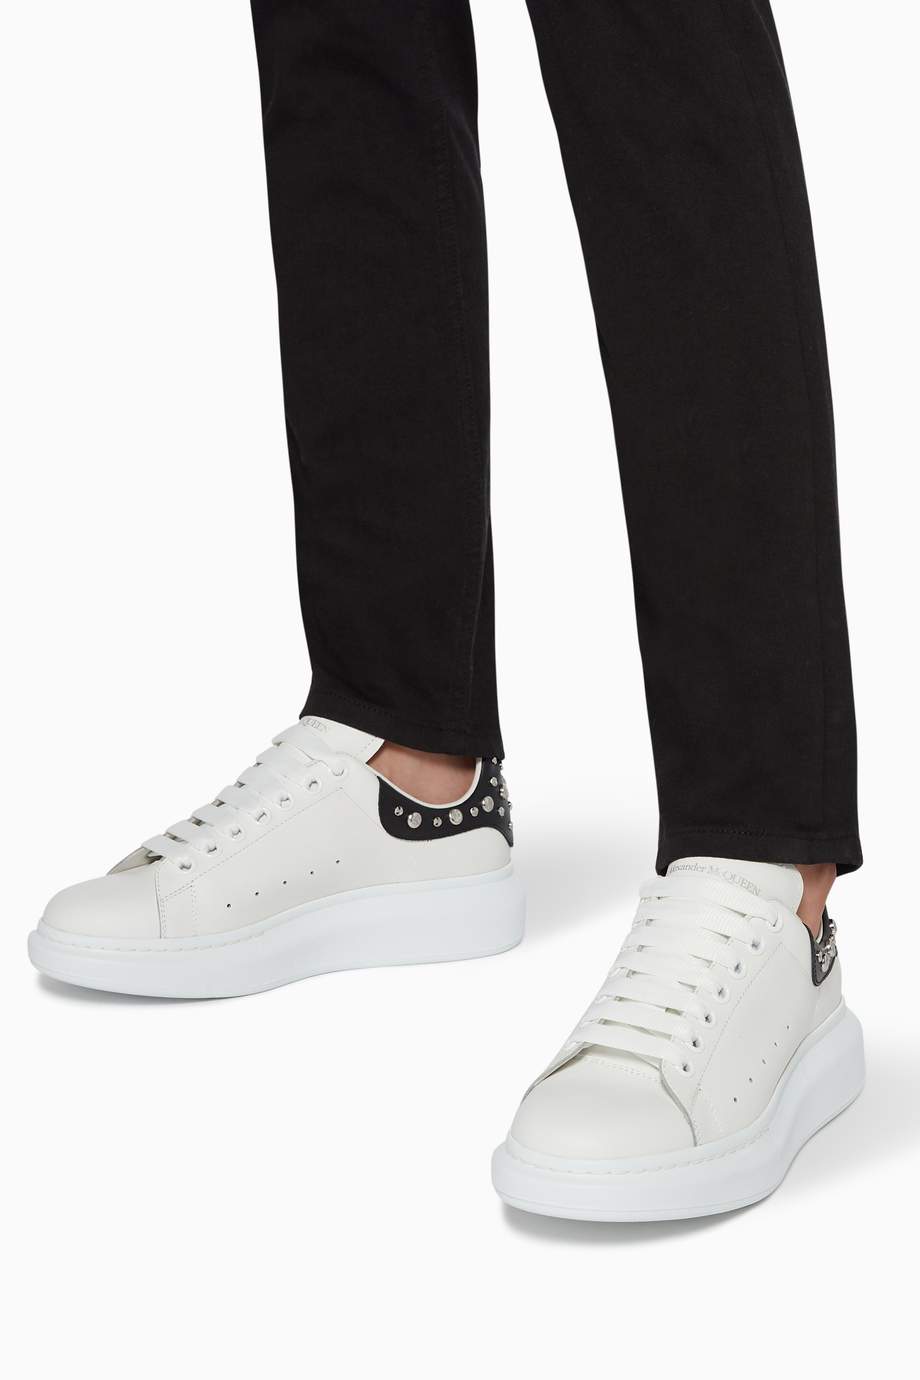 Shop Alexander McQueen White Oversized Leather Sneakers for Men ...